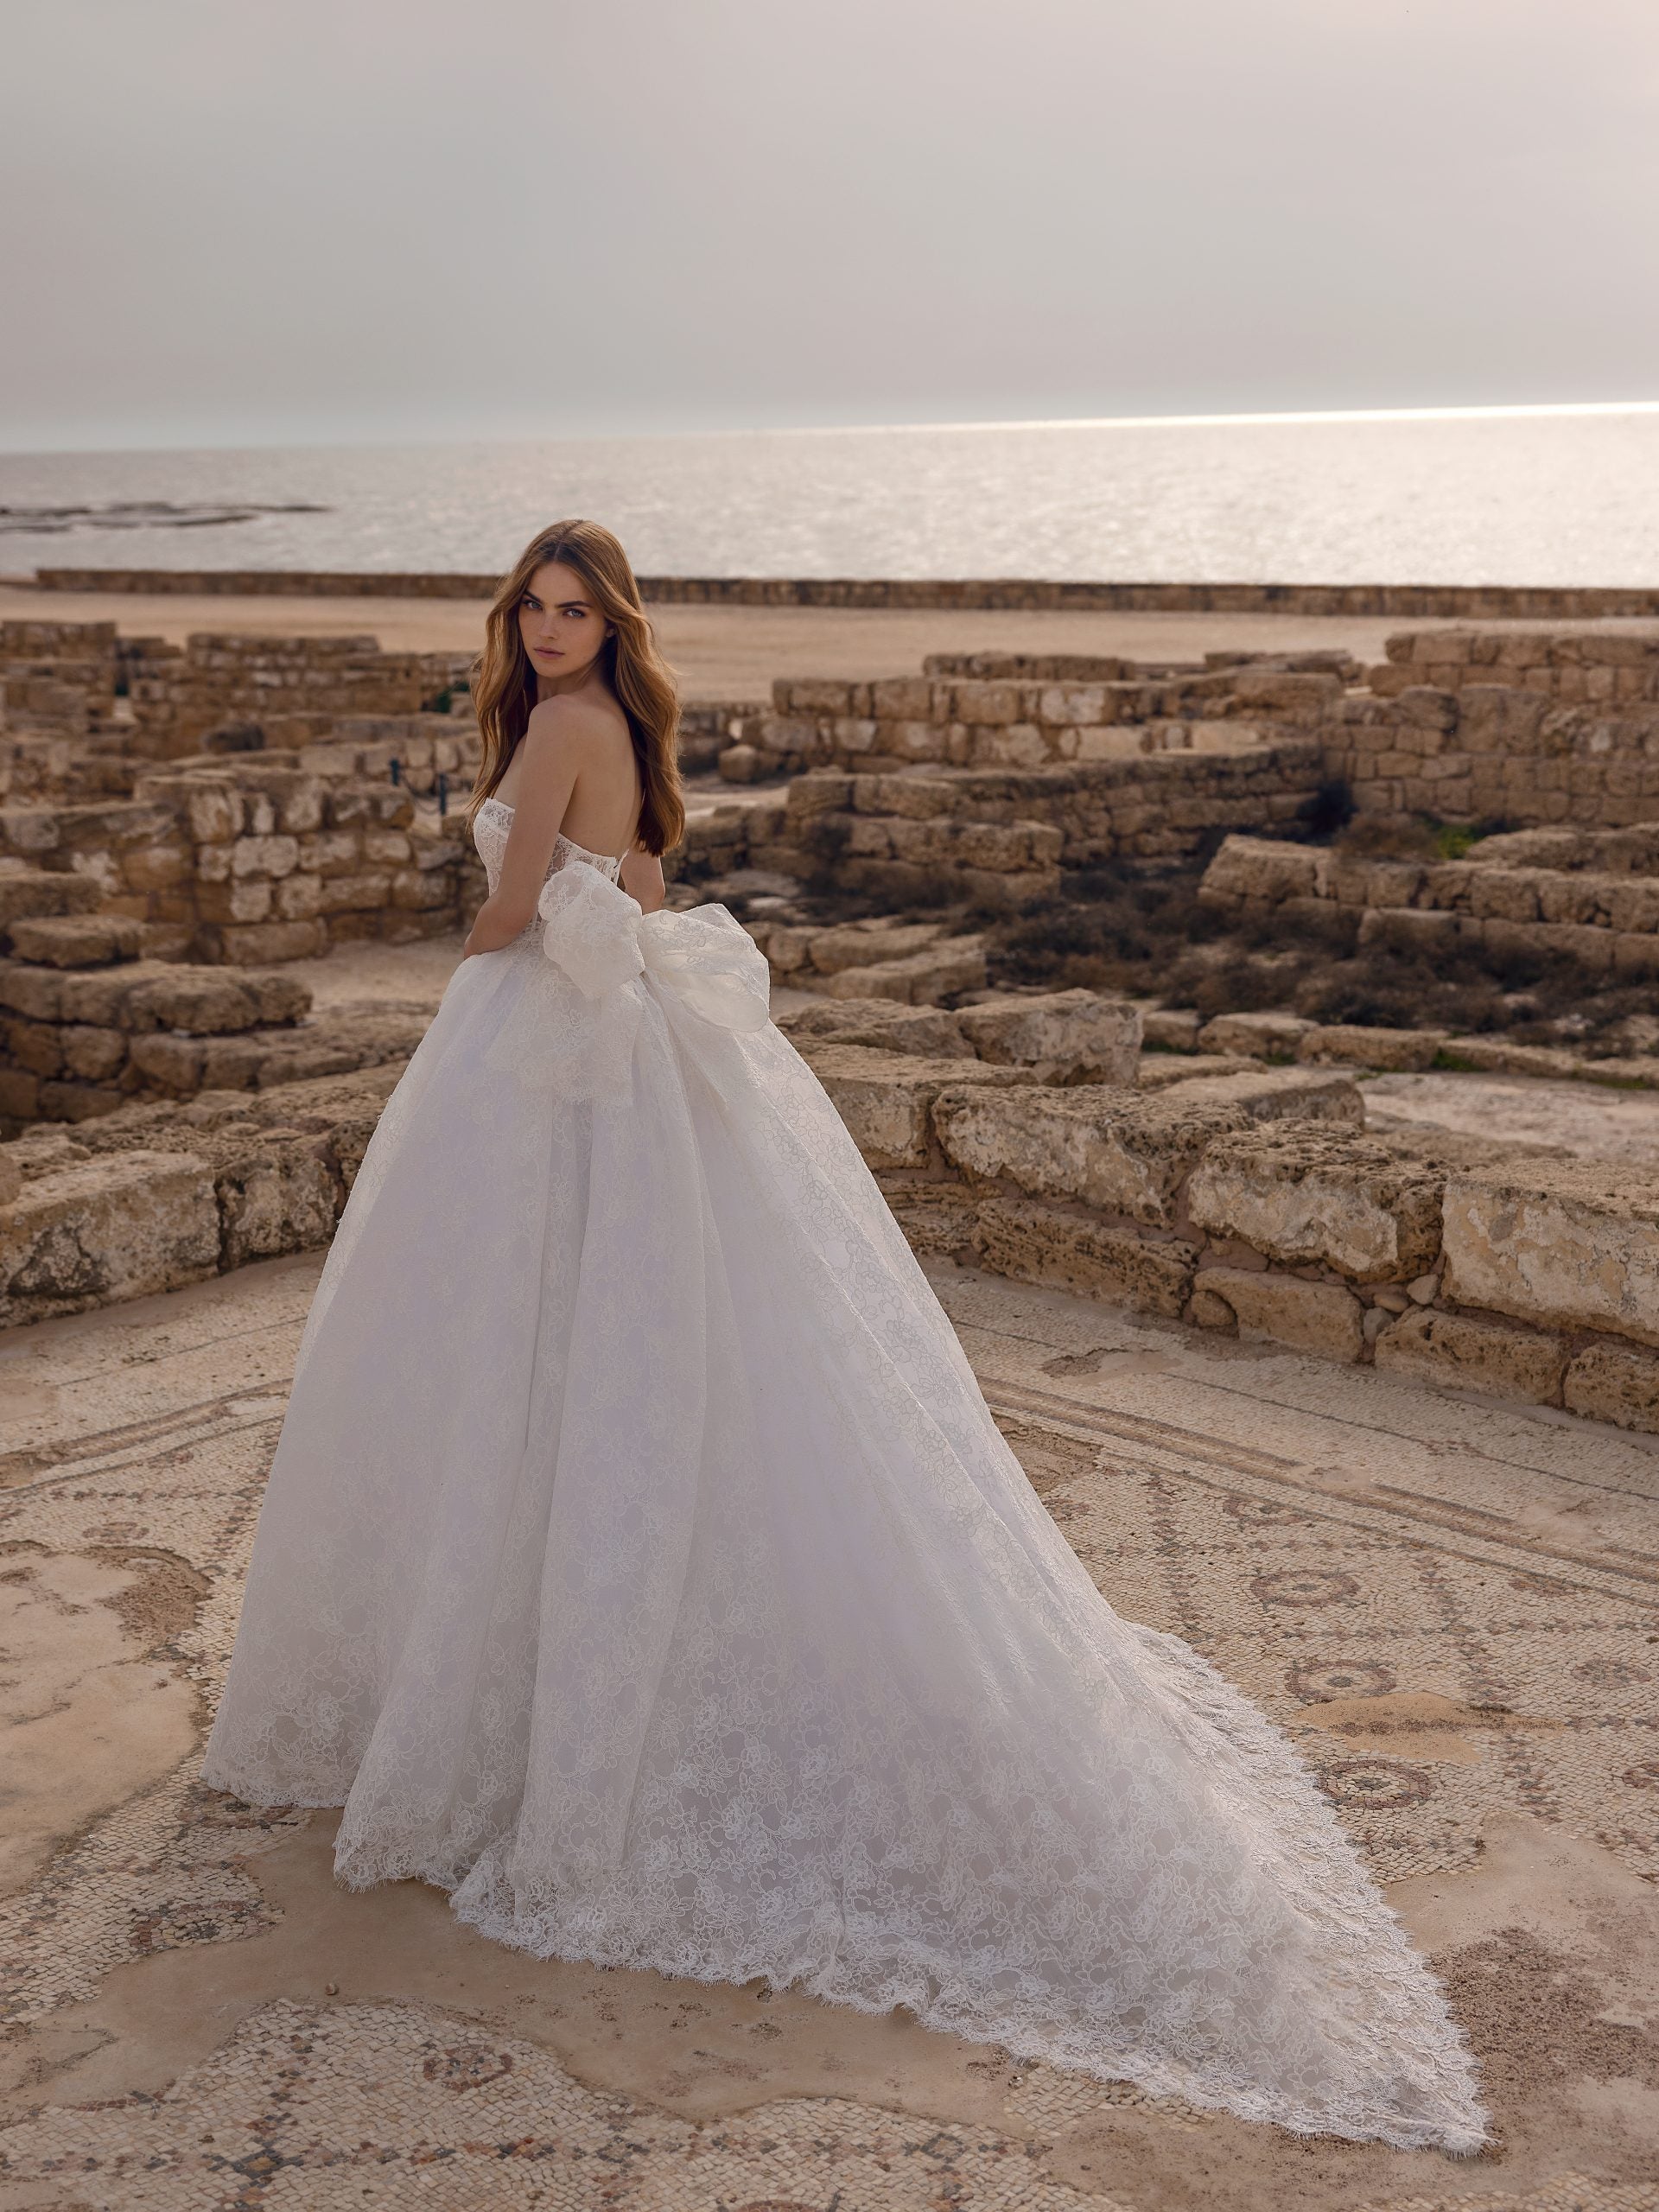 Lace Strapless Ball Gown Wedding Dress With Bow by Love by Pnina Tornai - Image 2